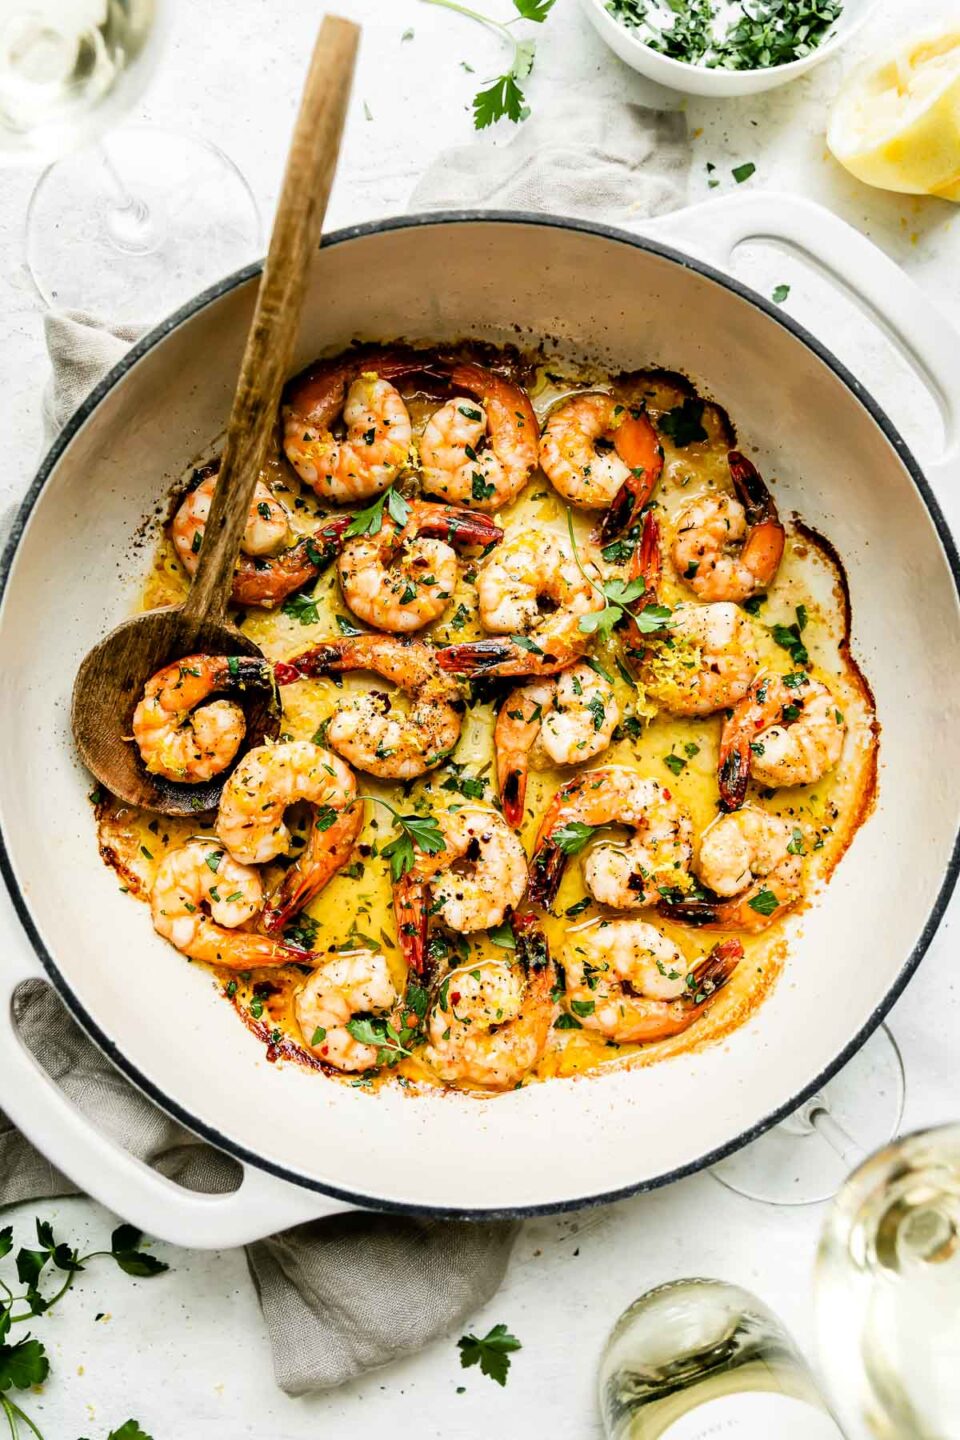 Baked shrimp scampi fills a large double handle braising pan. The pan sits atop a creamy white textured surface. A wooden serving spoon rests inside of the pan and the pan is surrounded by a stack of ceramic plates, two glasses of white wine, a bottle of Bread & Butter California Pinot Grigio, a small white bowl filled with finely chopped fresh parsley, and a spent lemon half. A cream colored linen napkin rests underneath the pan.